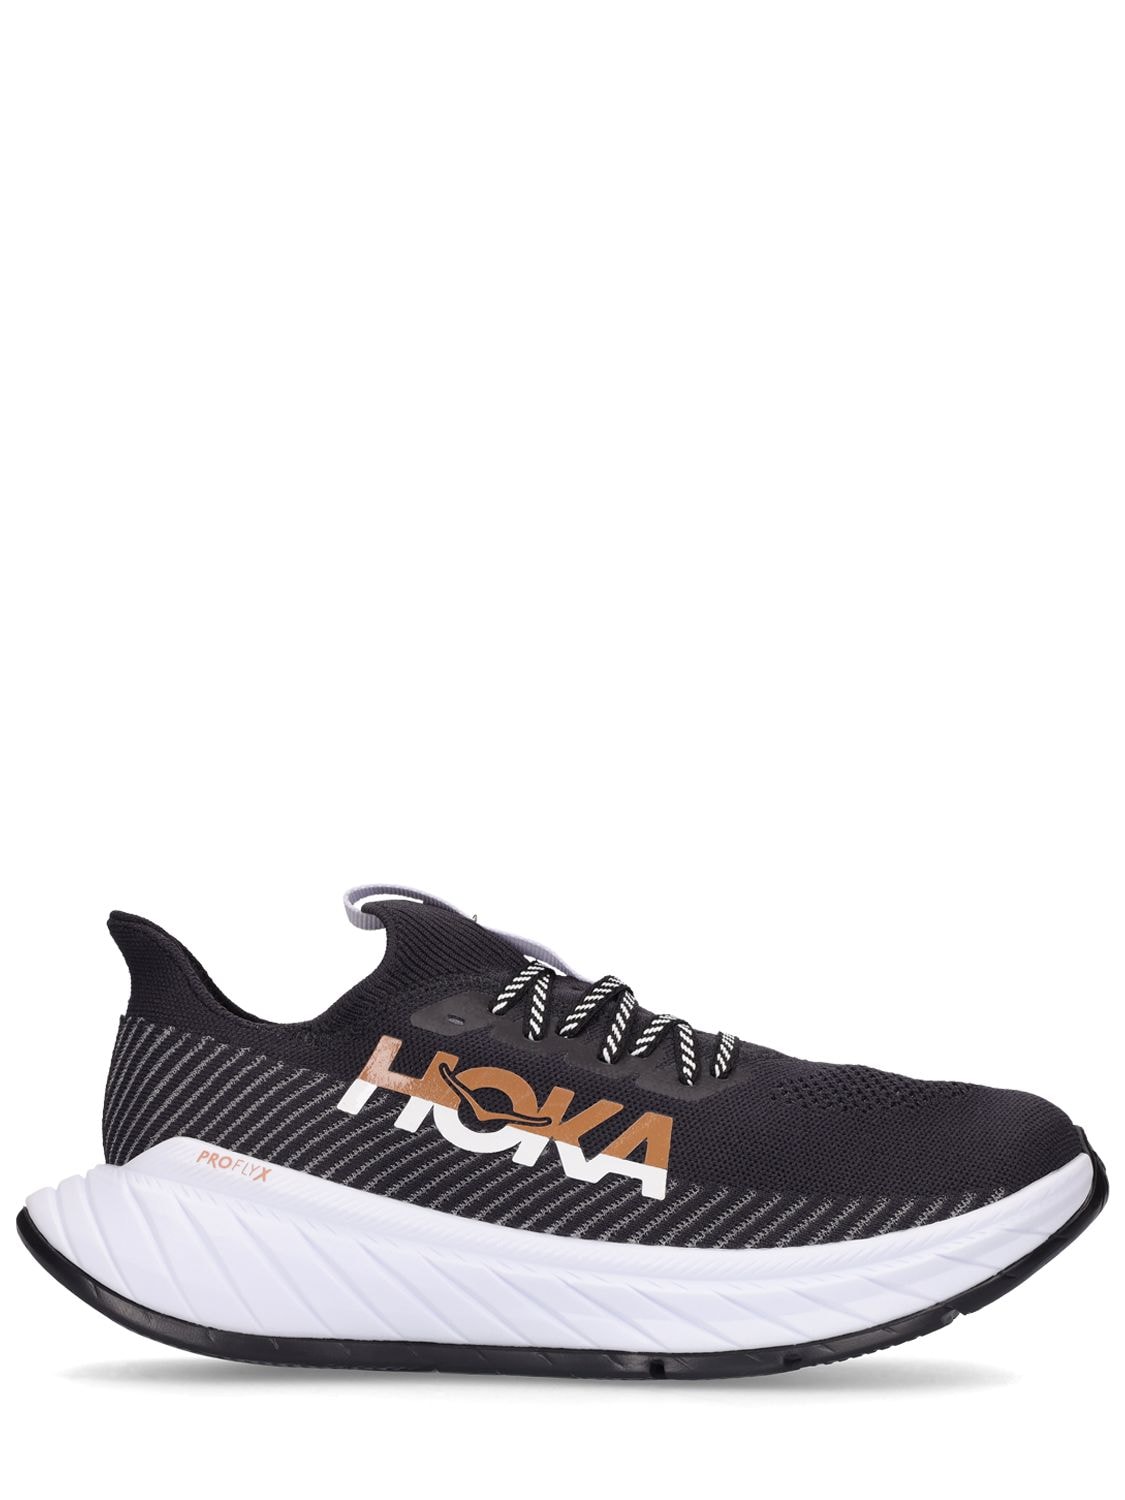 HOKA ONE ONE CARBON X 3 RUNNING SNEAKERS